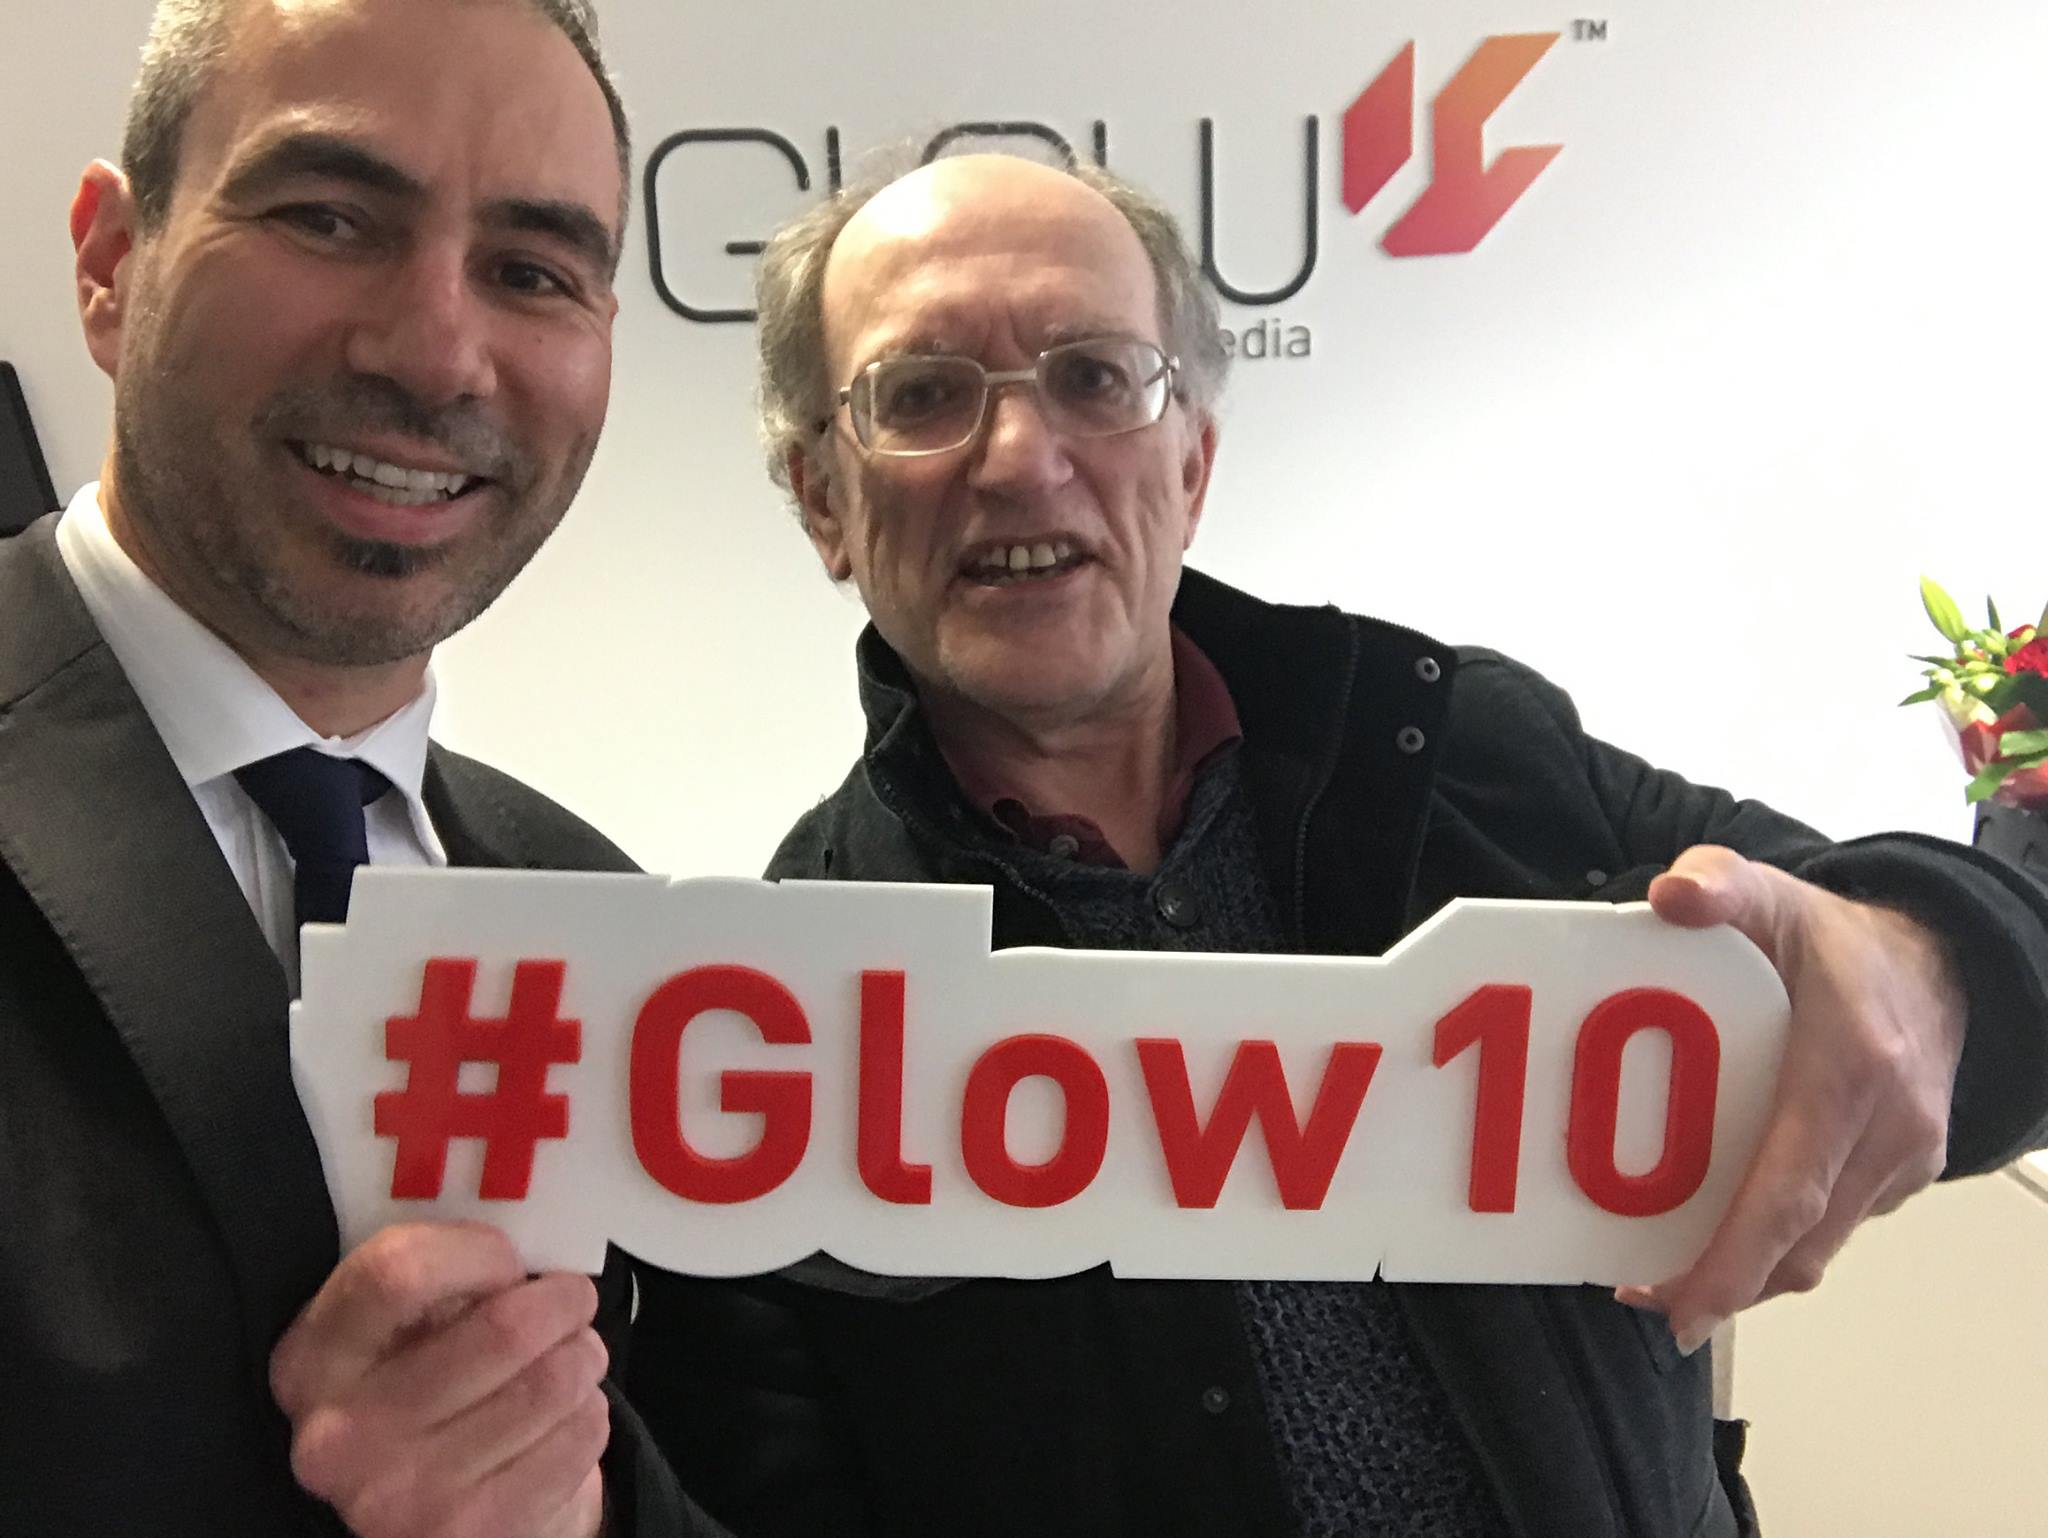 Phil Blything with a glow10 sign